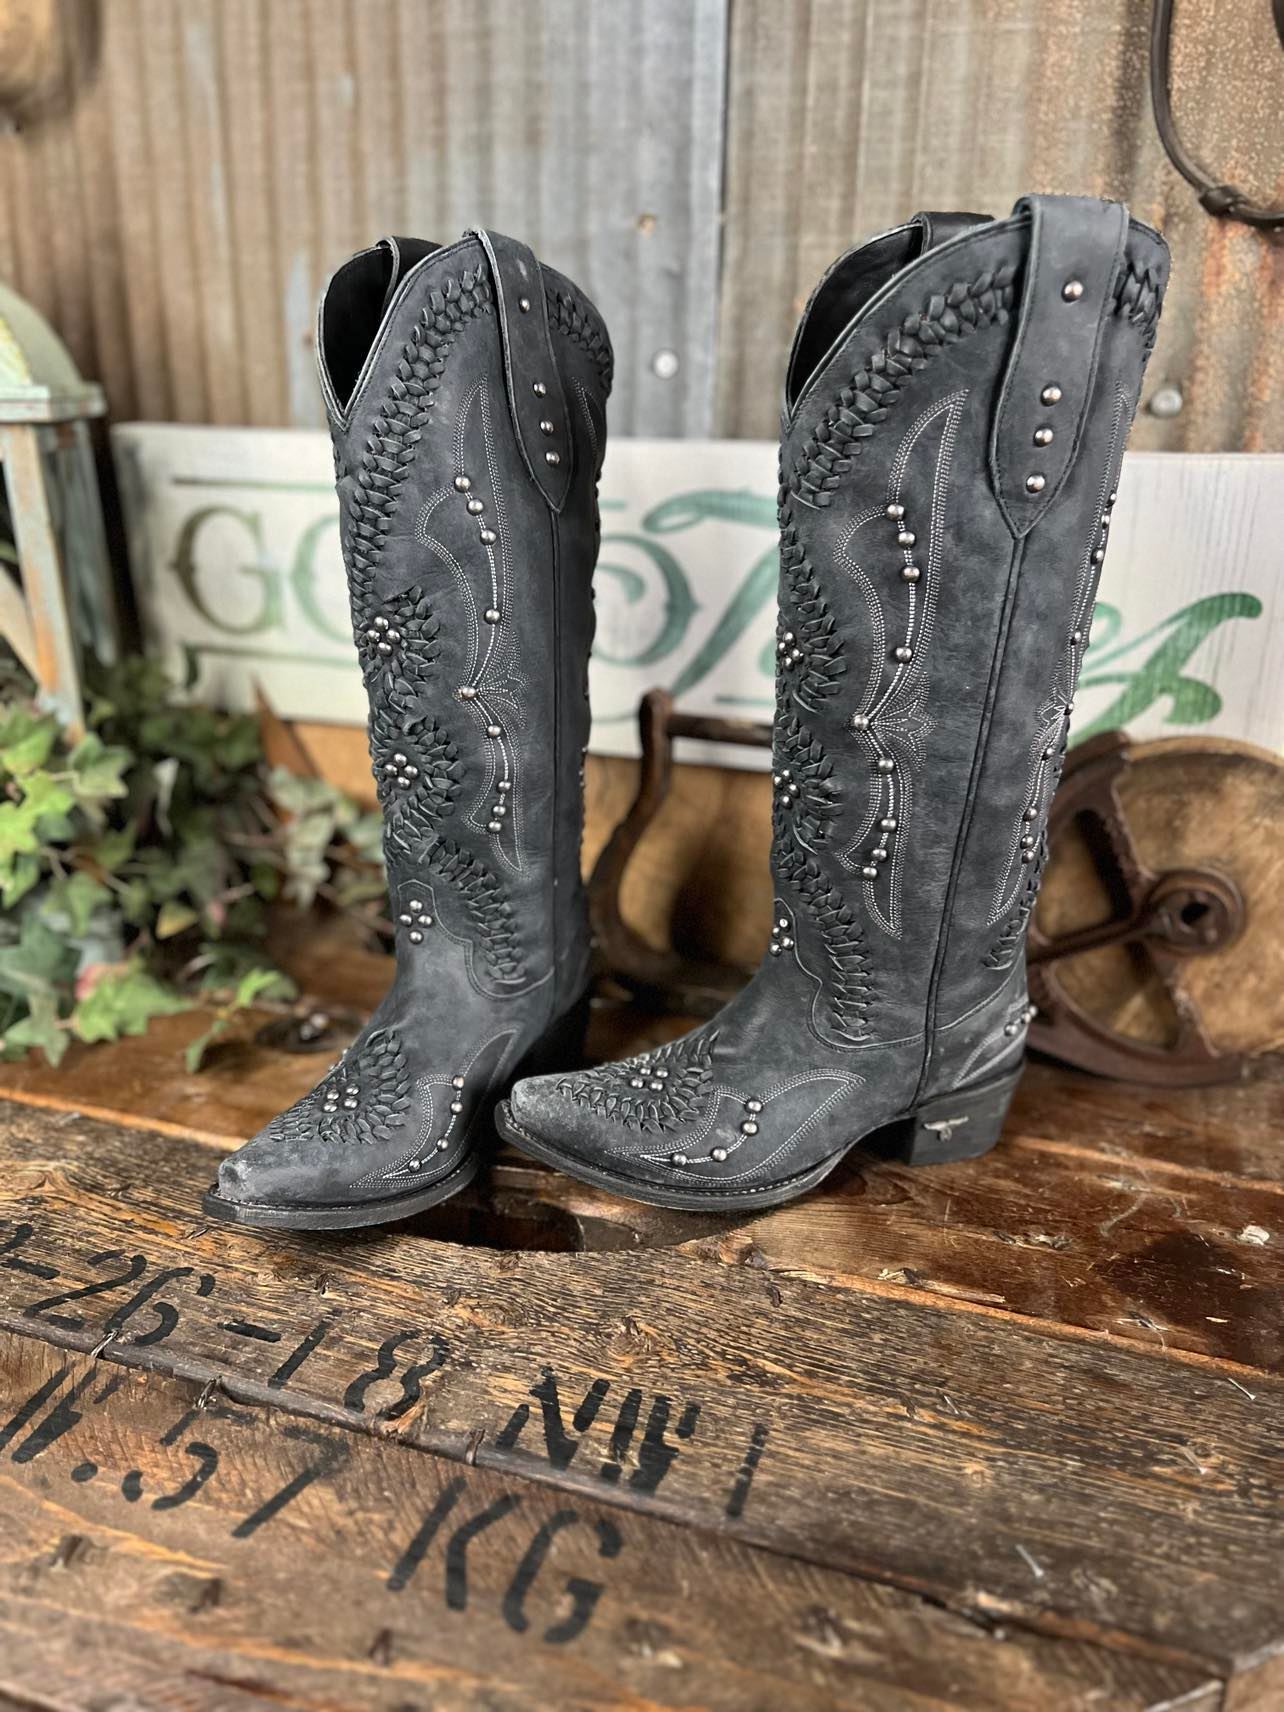 Lane Boots Cossette Boots in Jet Black-Women's Boots-Lane Boots-Lucky J Boots & More, Women's, Men's, & Kids Western Store Located in Carthage, MO